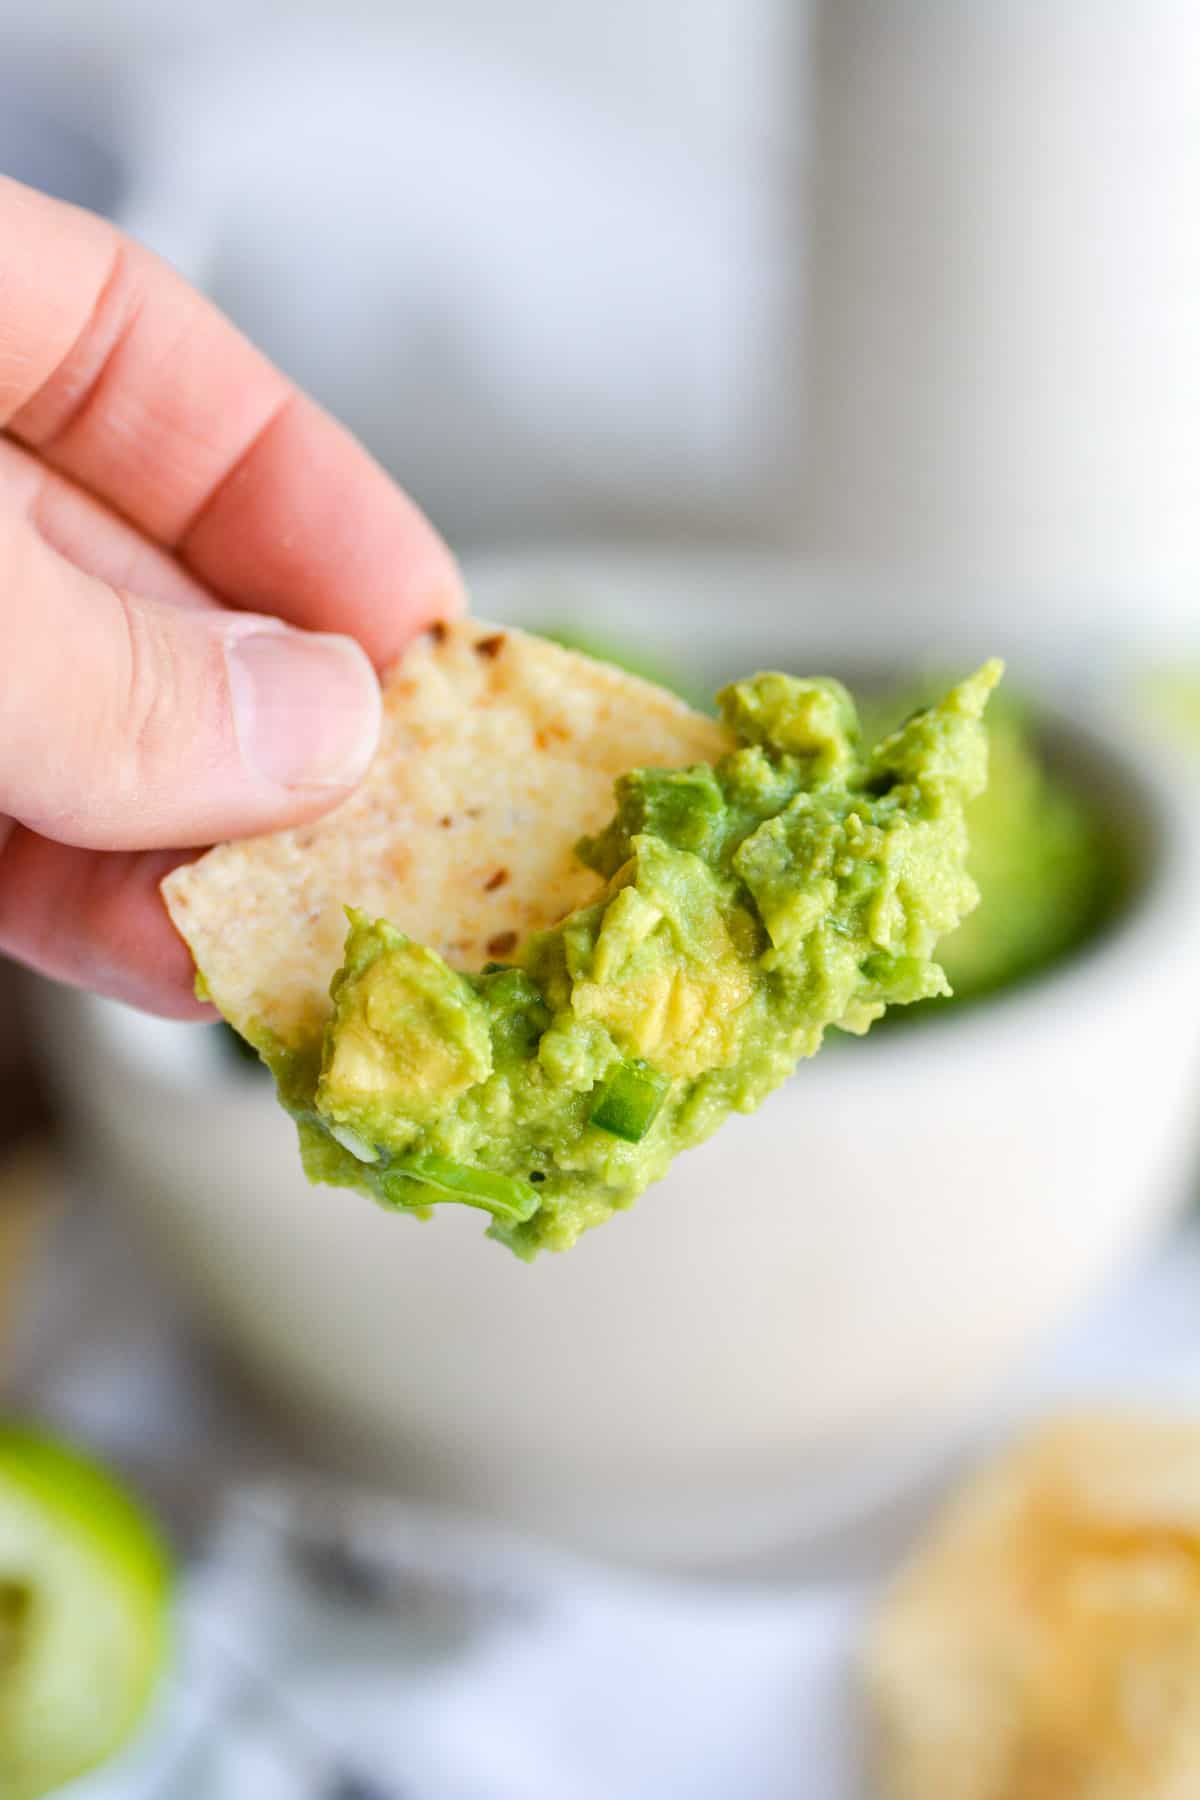 A tortilla chip with 4 ingredient guacamole without cilantro on it.